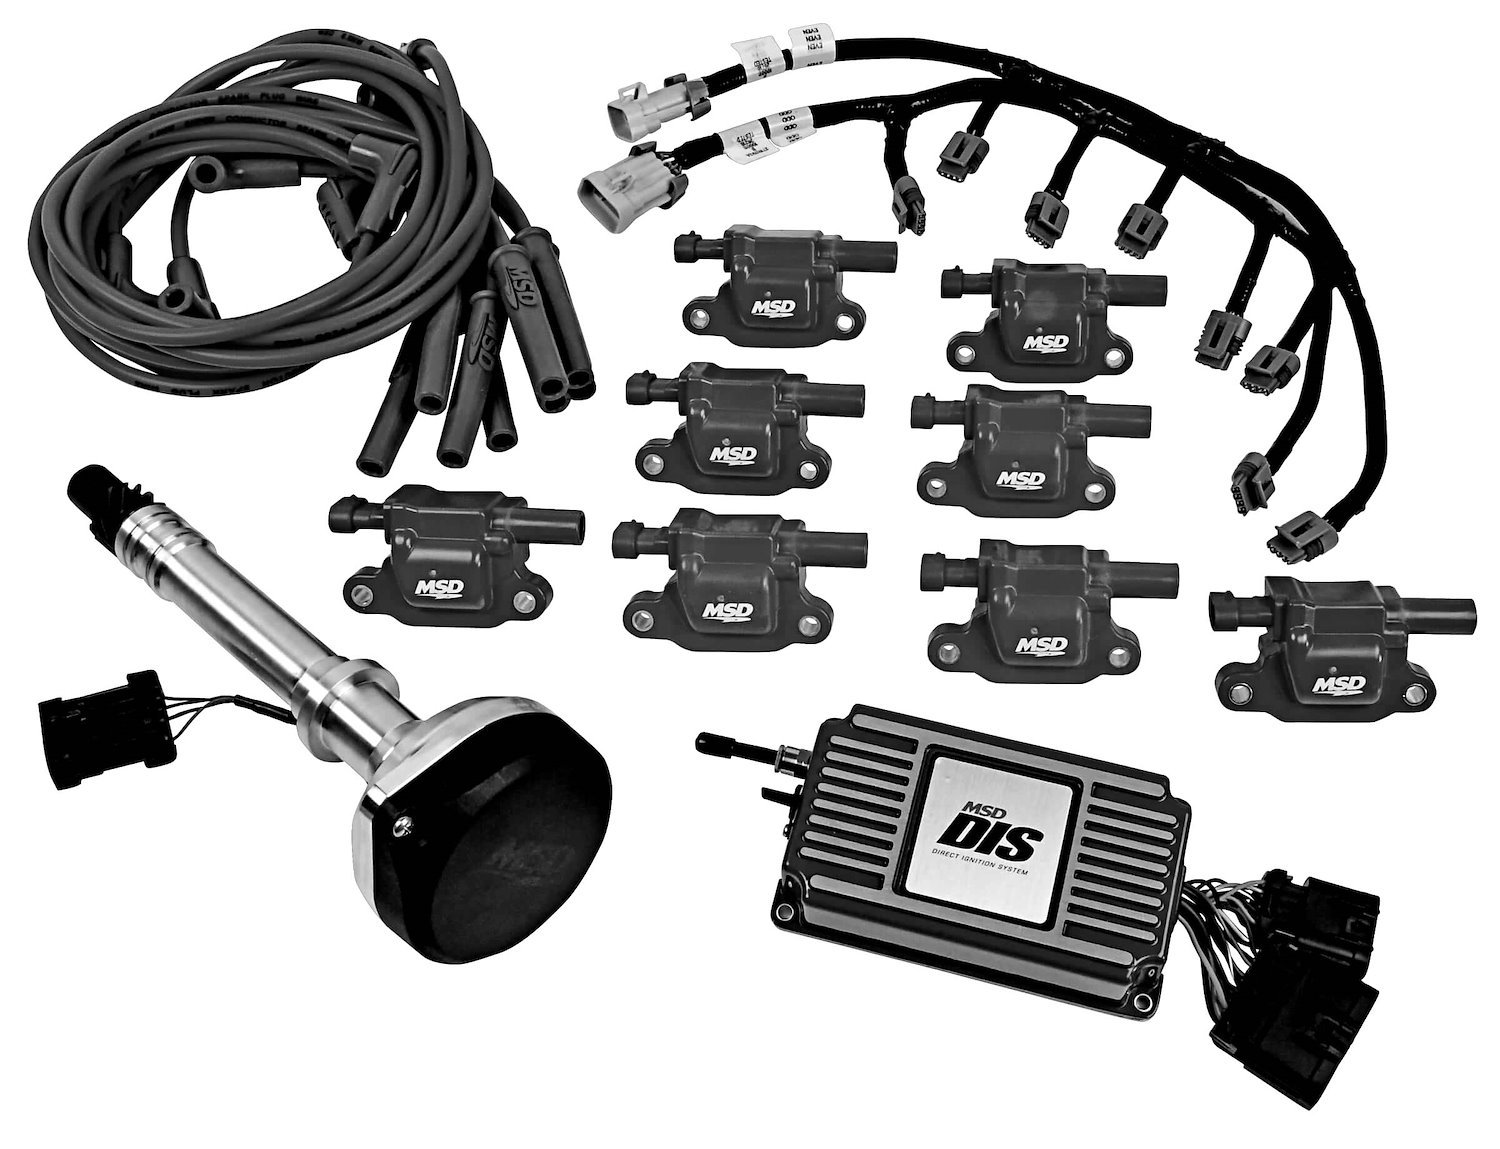 601513 Direct Ignition System [DIS] Kit Small Block Chevy, Big Block Chevy - Black